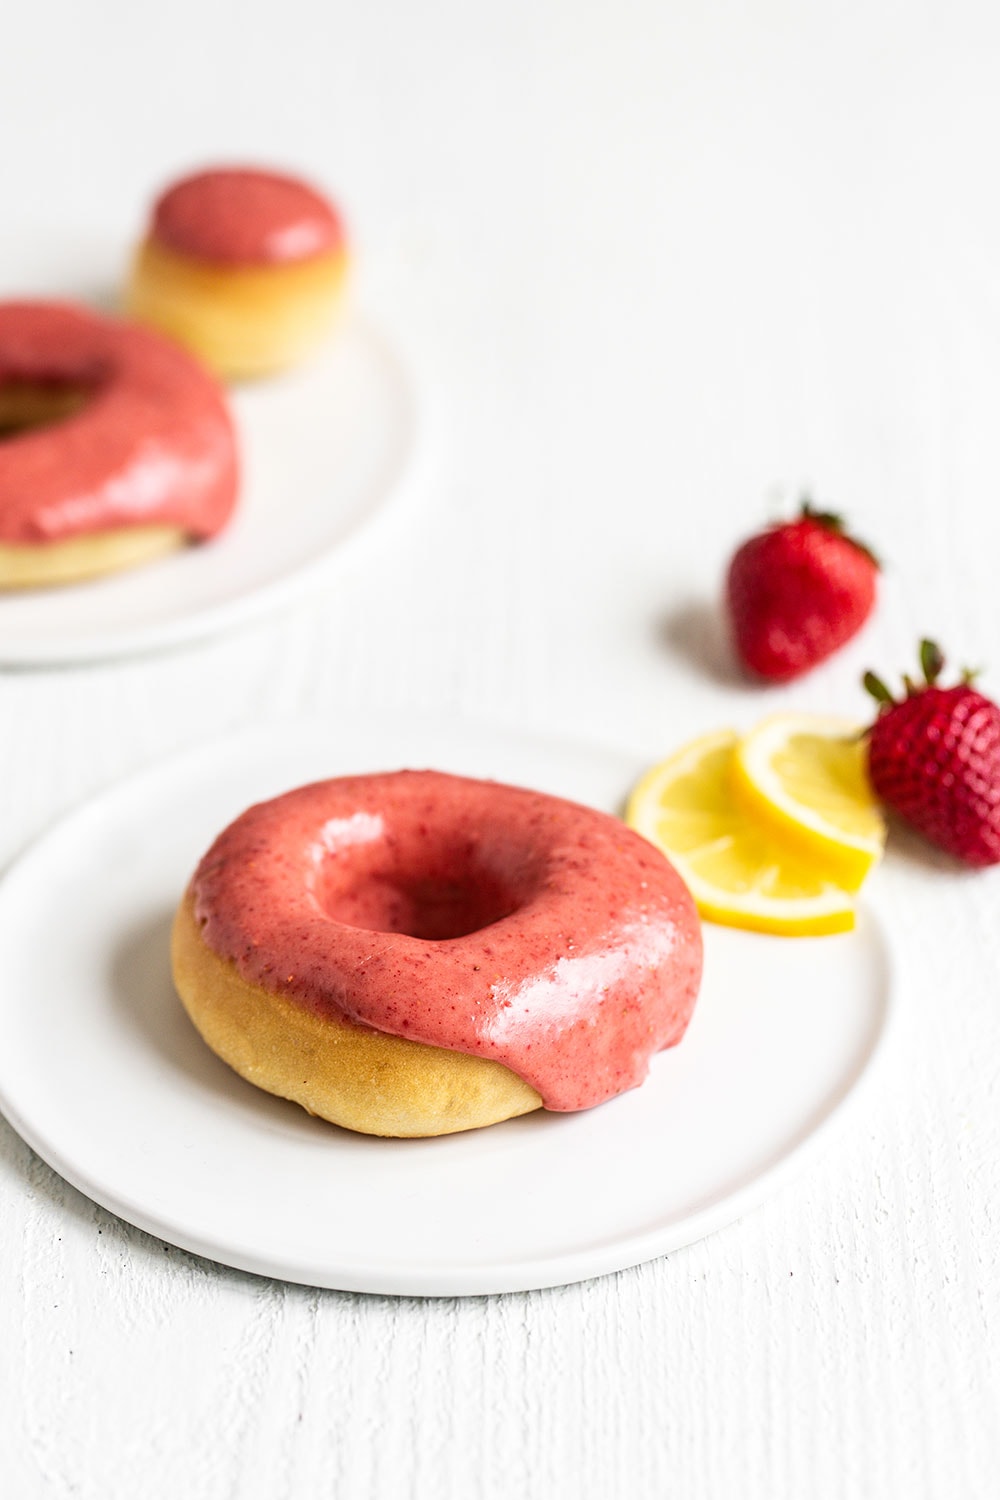 Doughnut on a plate with a slice of lemon and strawberries